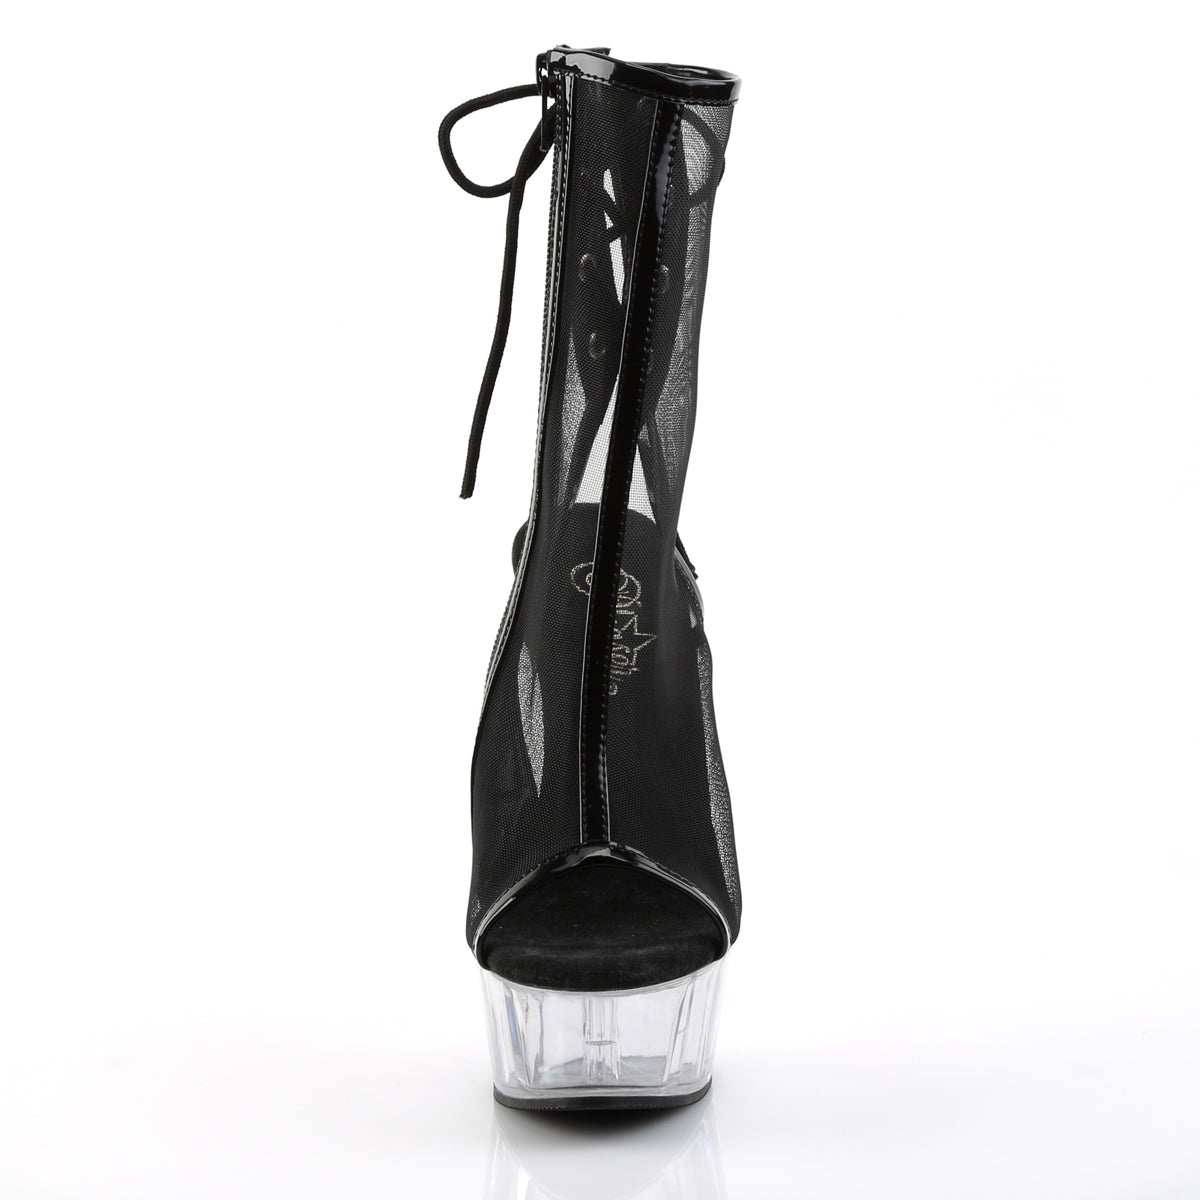 DELIGHT-1018MSH Clear & Black Calf High Peep Toe Boots